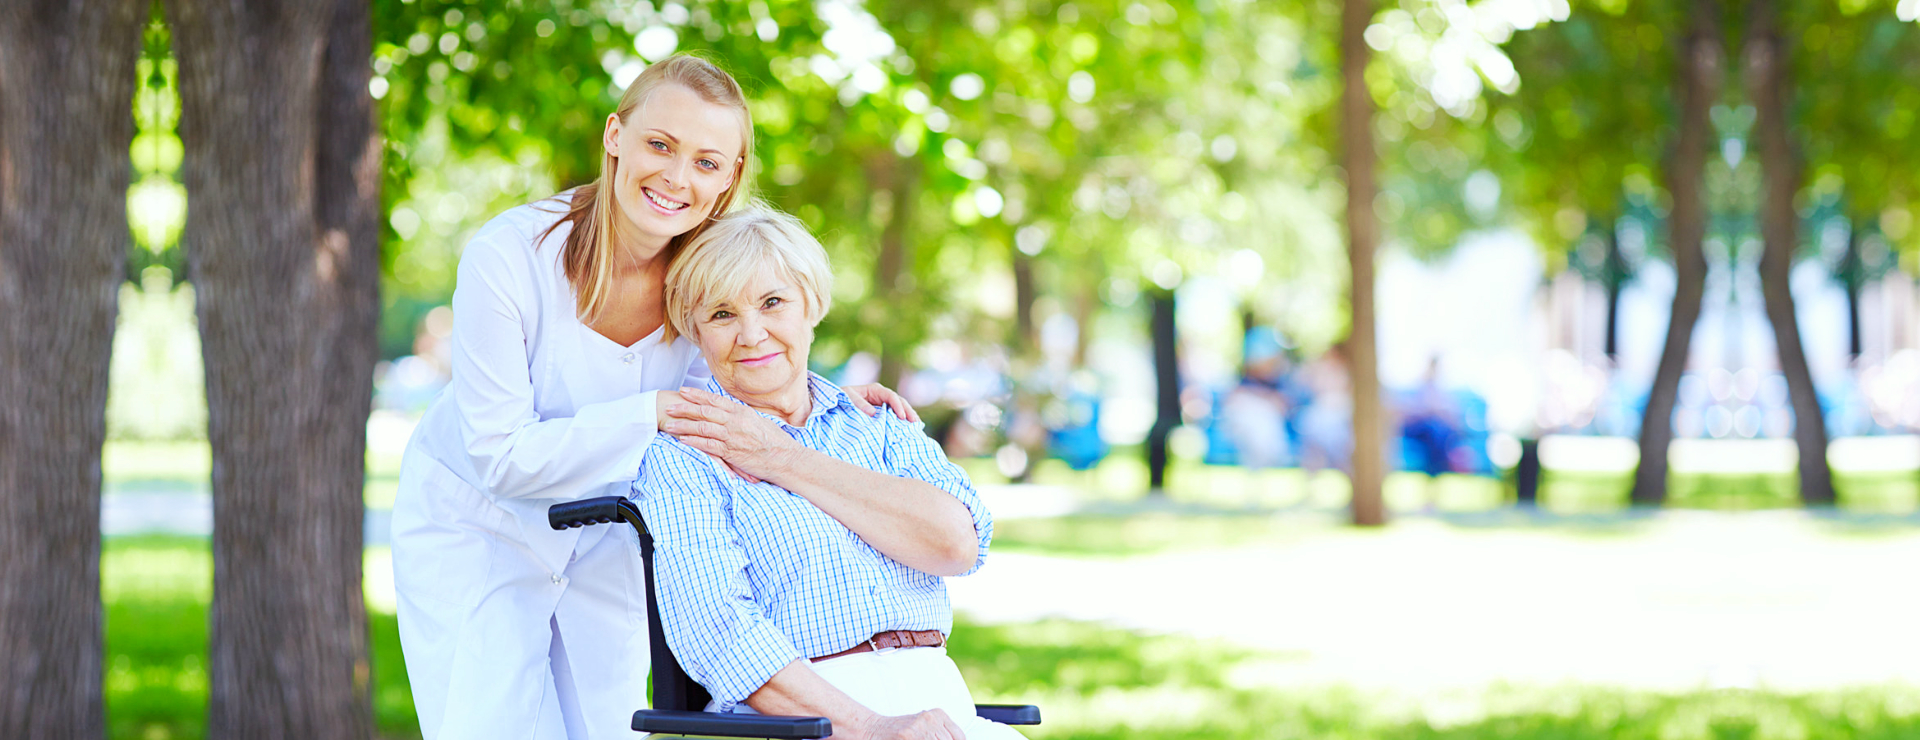 caregiver and elderly woman in a wheelchair smiling